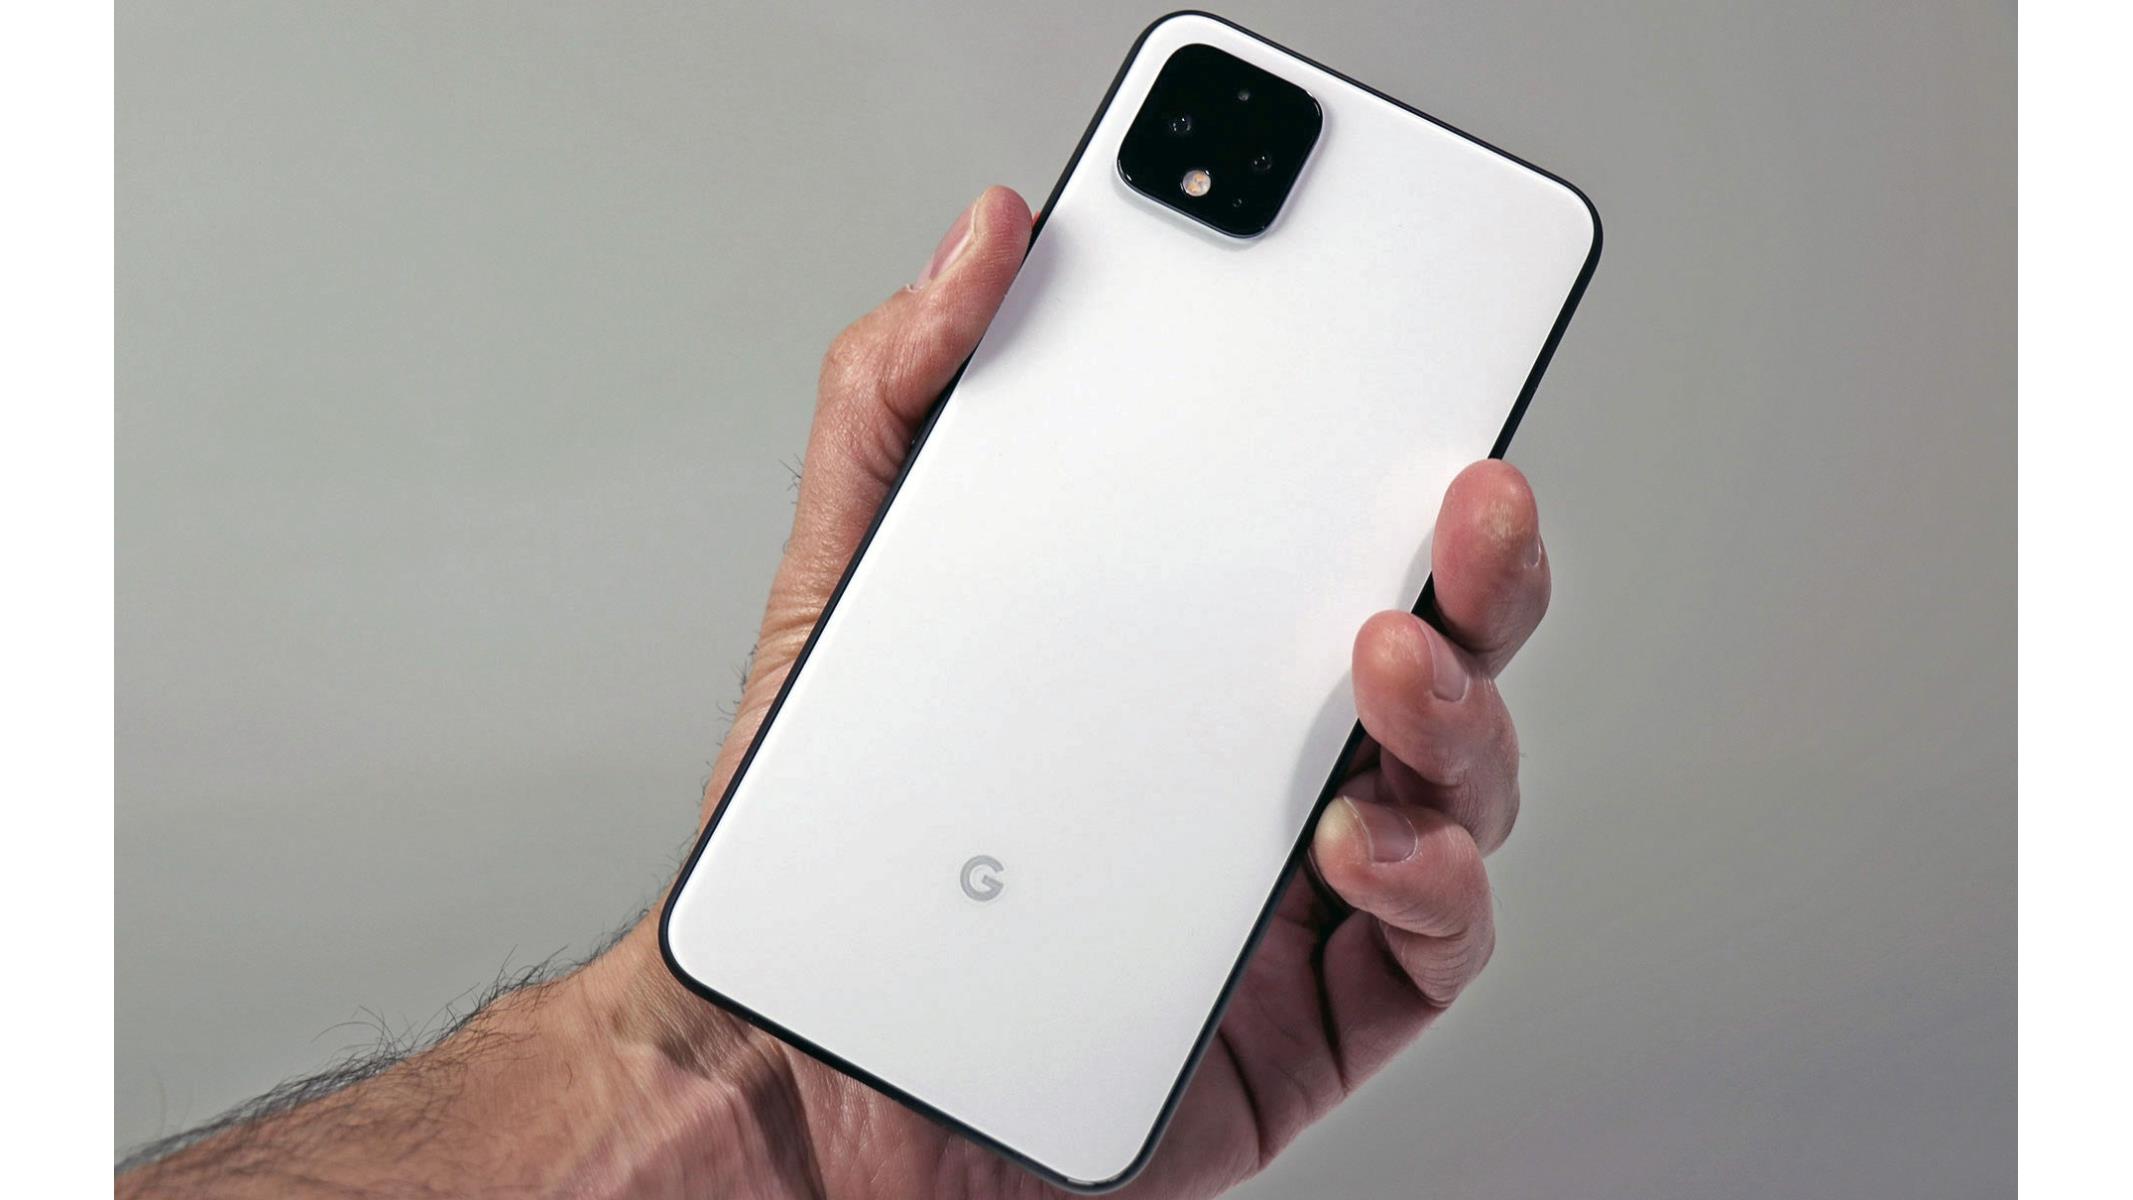 Pixel 4 and 4 XL: hands-on with Google's new phones - The Verge